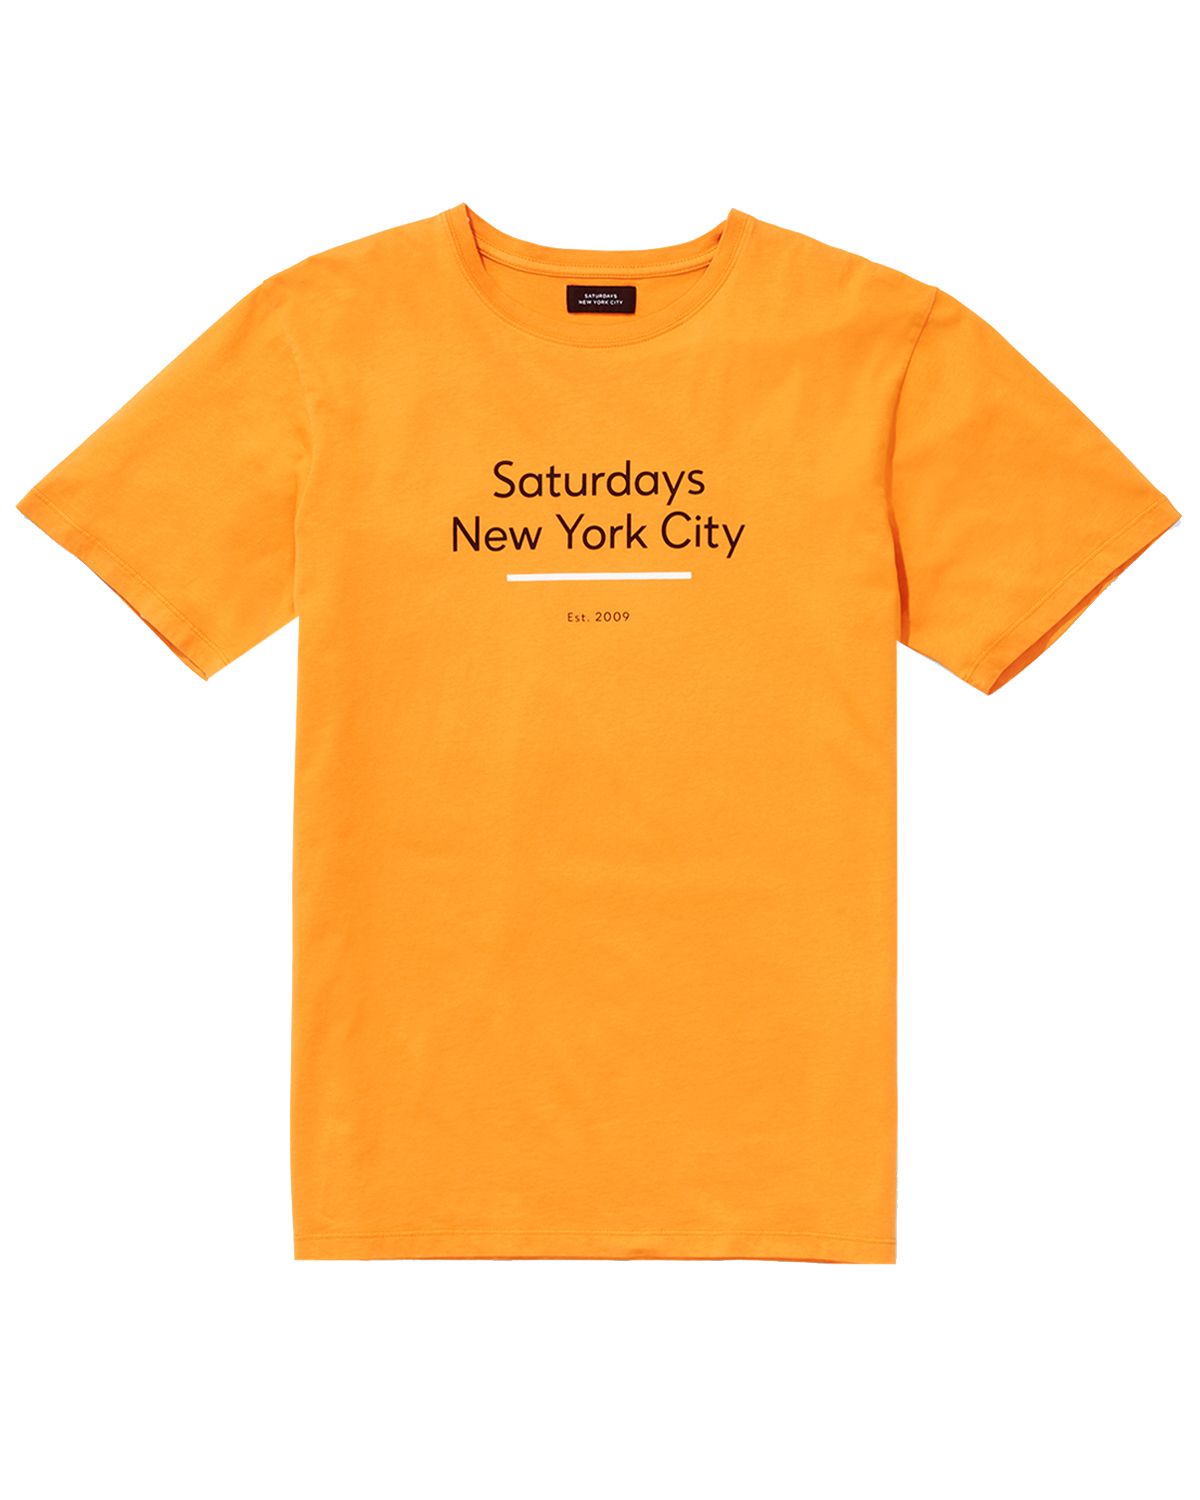 Every Look from the Saturdays NYC x Mr Porter Collection